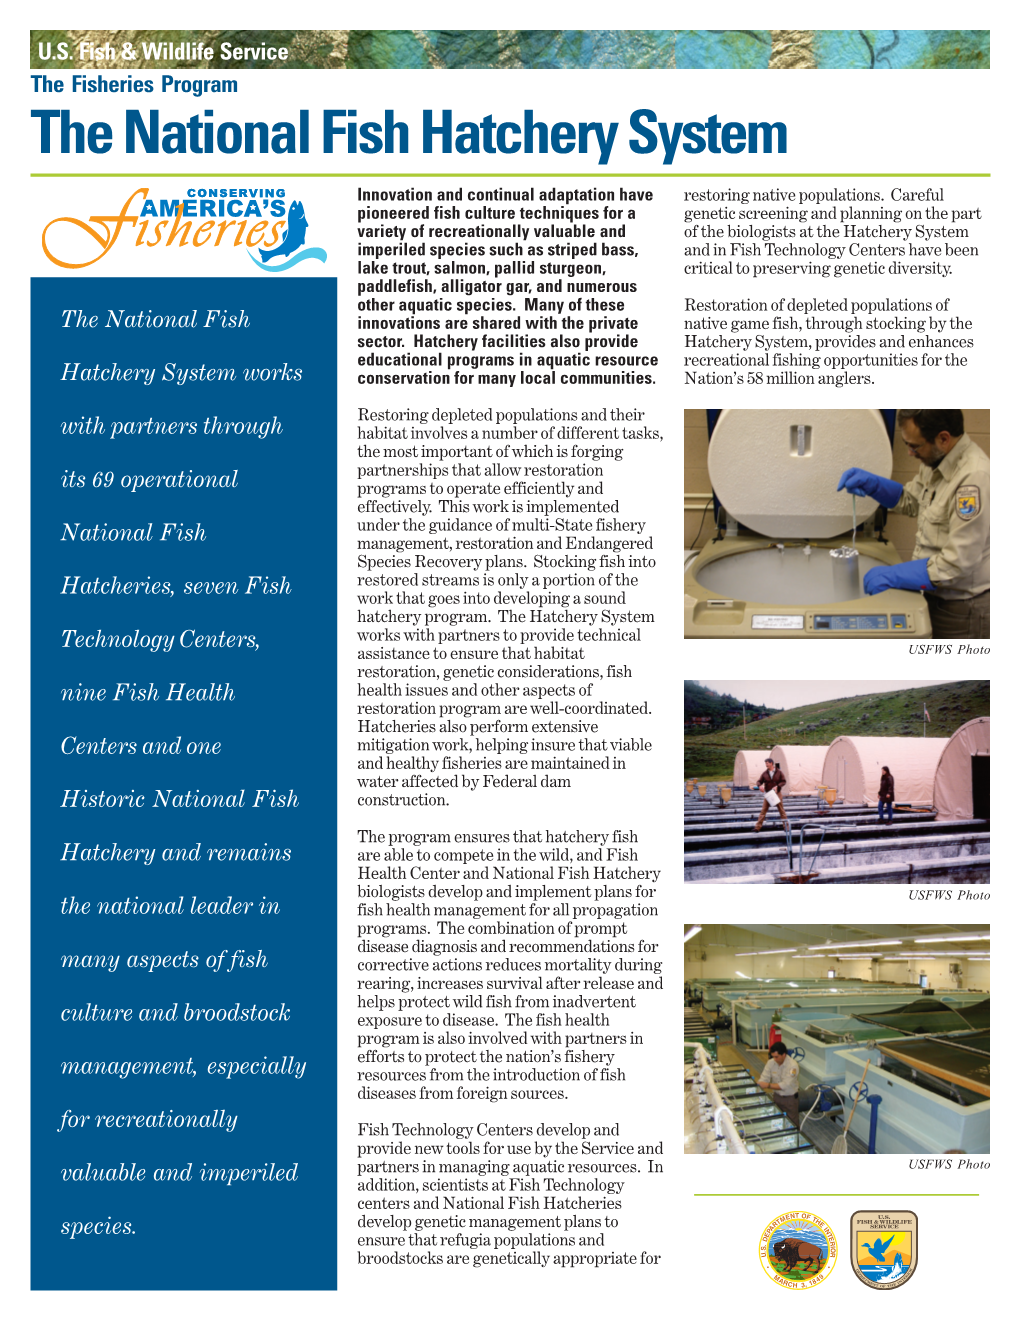 The National Fish Hatchery System